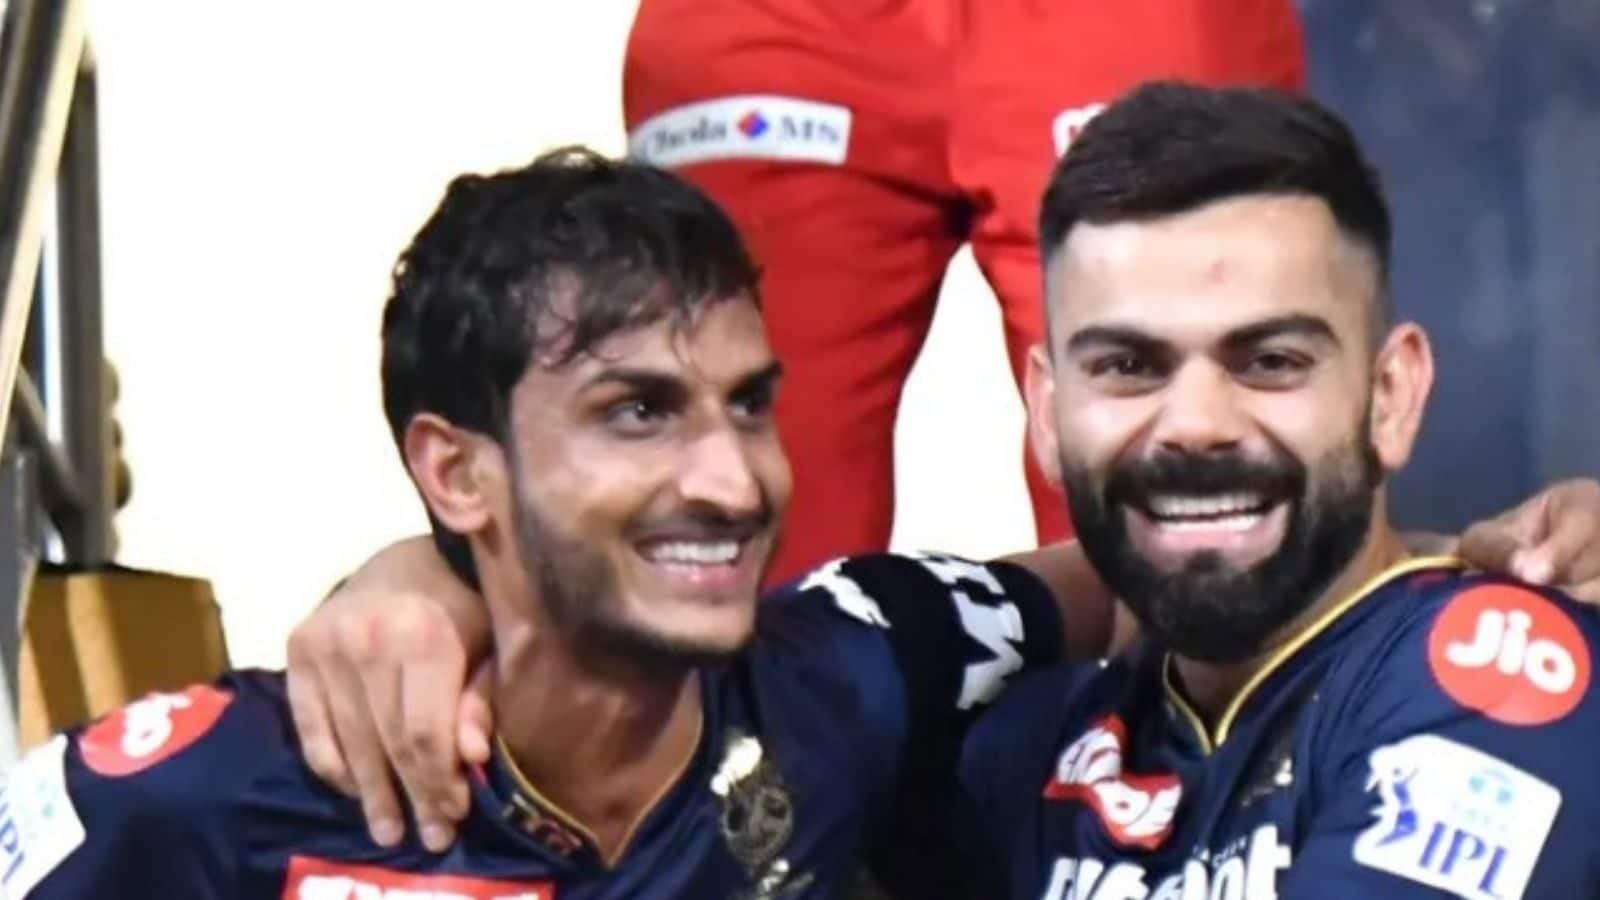 You leave RCB, you become successful - Fans hail Shahbaz Ahmed